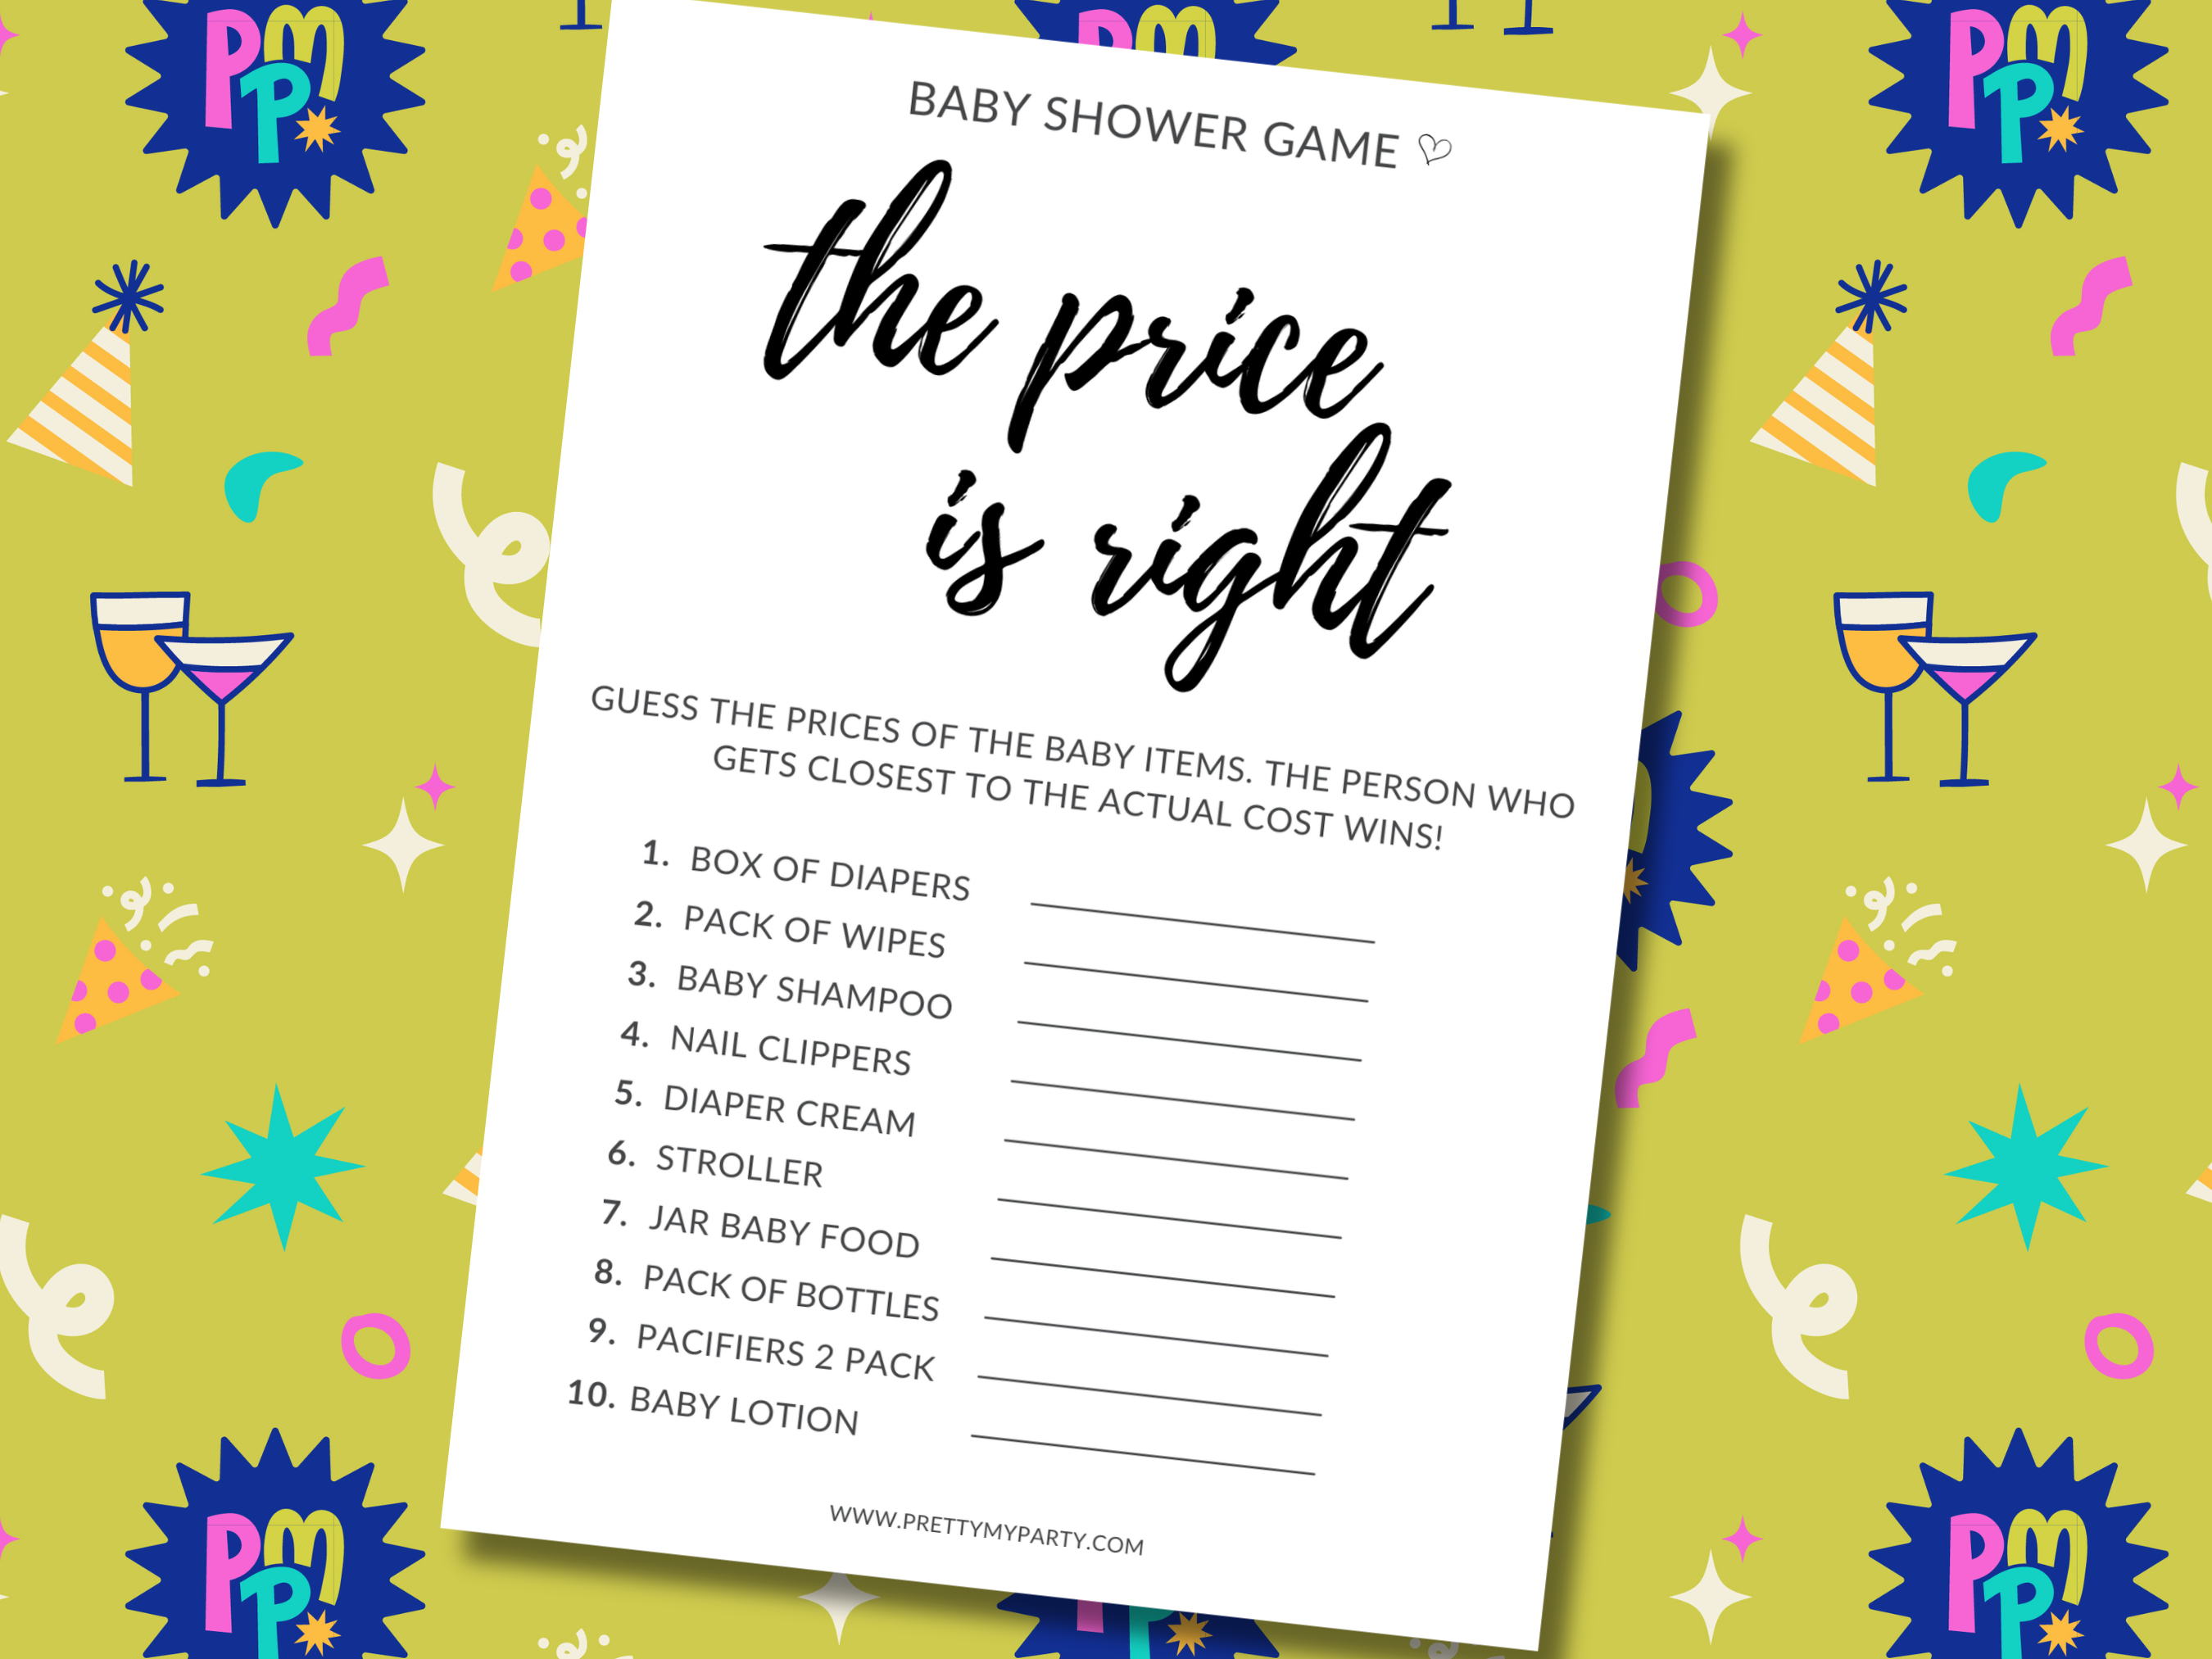 The Price Is Right Free Printable Baby Shower Game on Pretty My Party